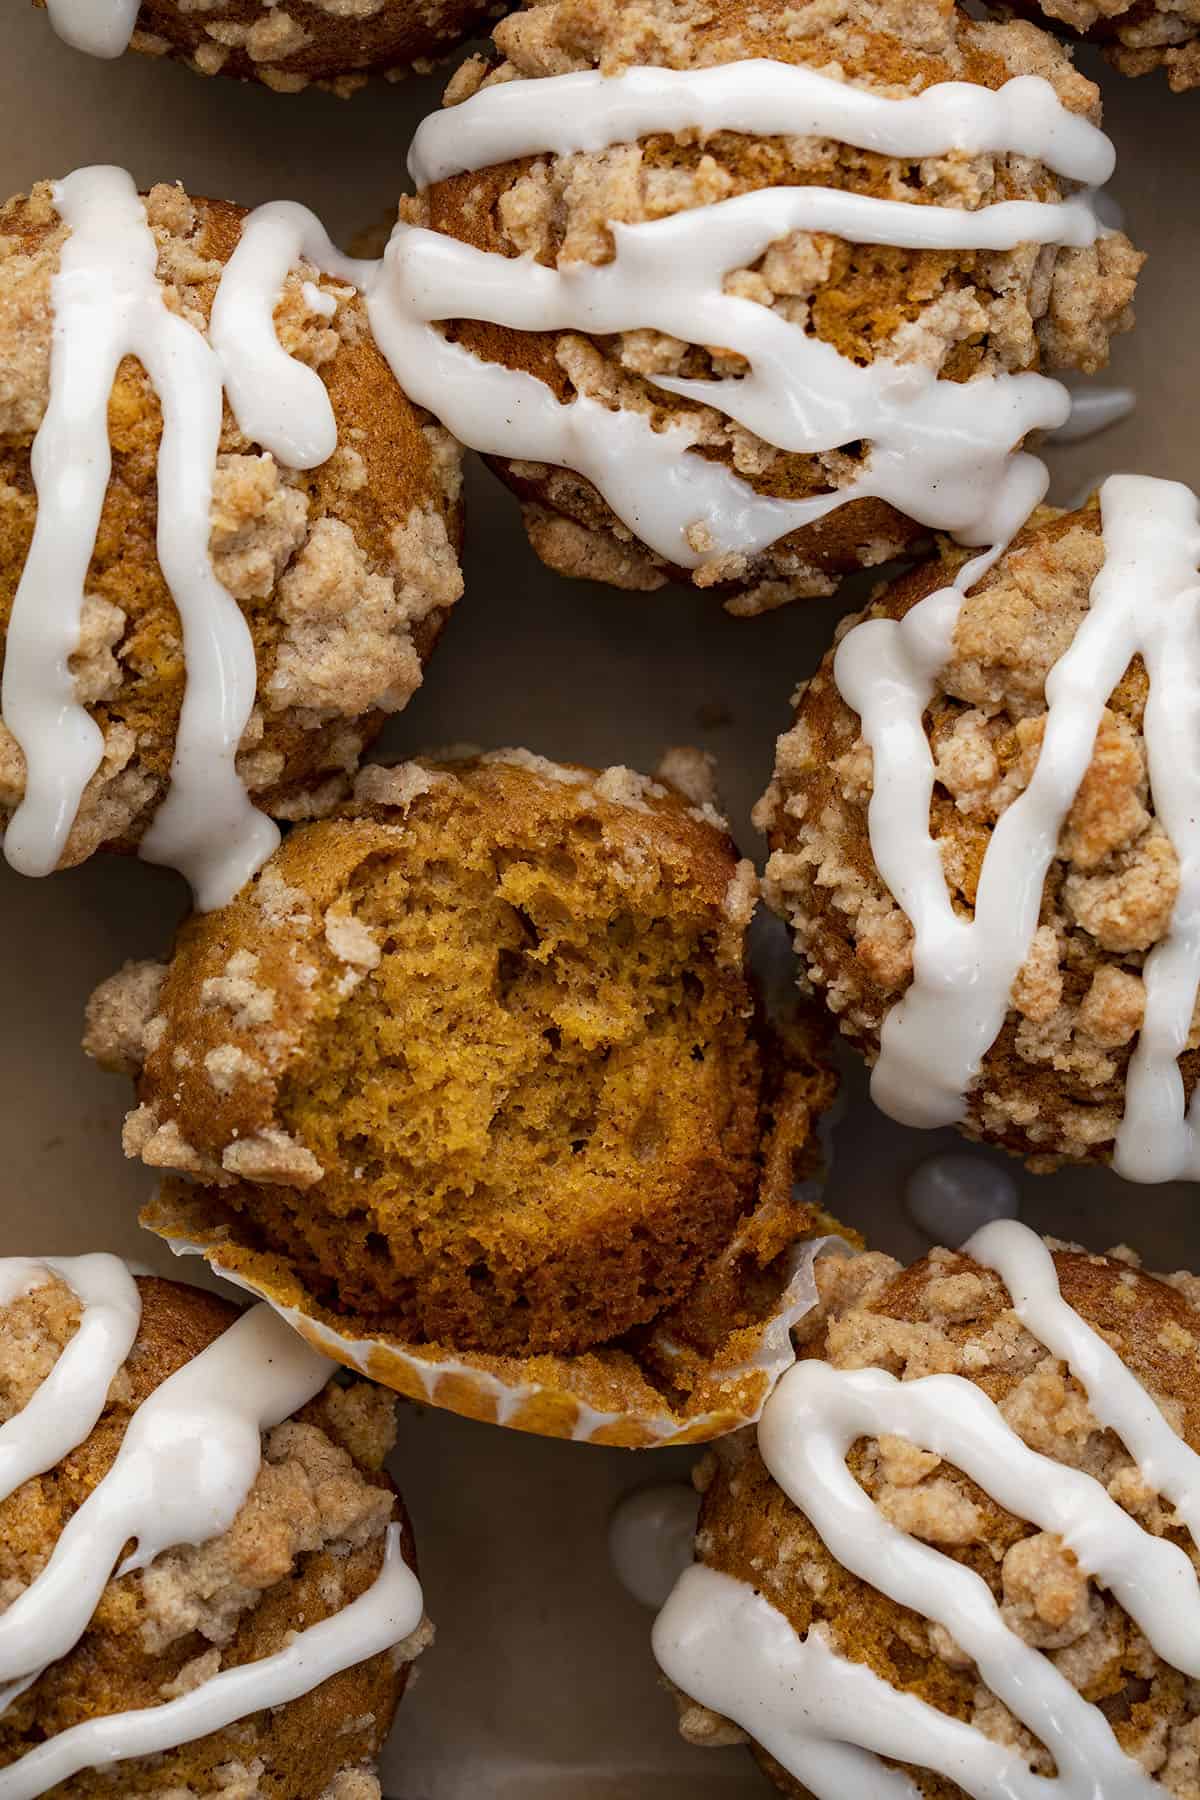 Pumpkin Streusel Muffins Close Together with One Broken in Half Showing Texture Inside. Breakfast, Muffins, Baking, Breakfast Muffins, Fall Baking, Pumpkin Recipes, Pumpkin Spice Muffins, Maple Glaze, Dessert, Best Muffin Recipes, Big Top Muffins, Big Muffin Tops, i am baker, iambaker